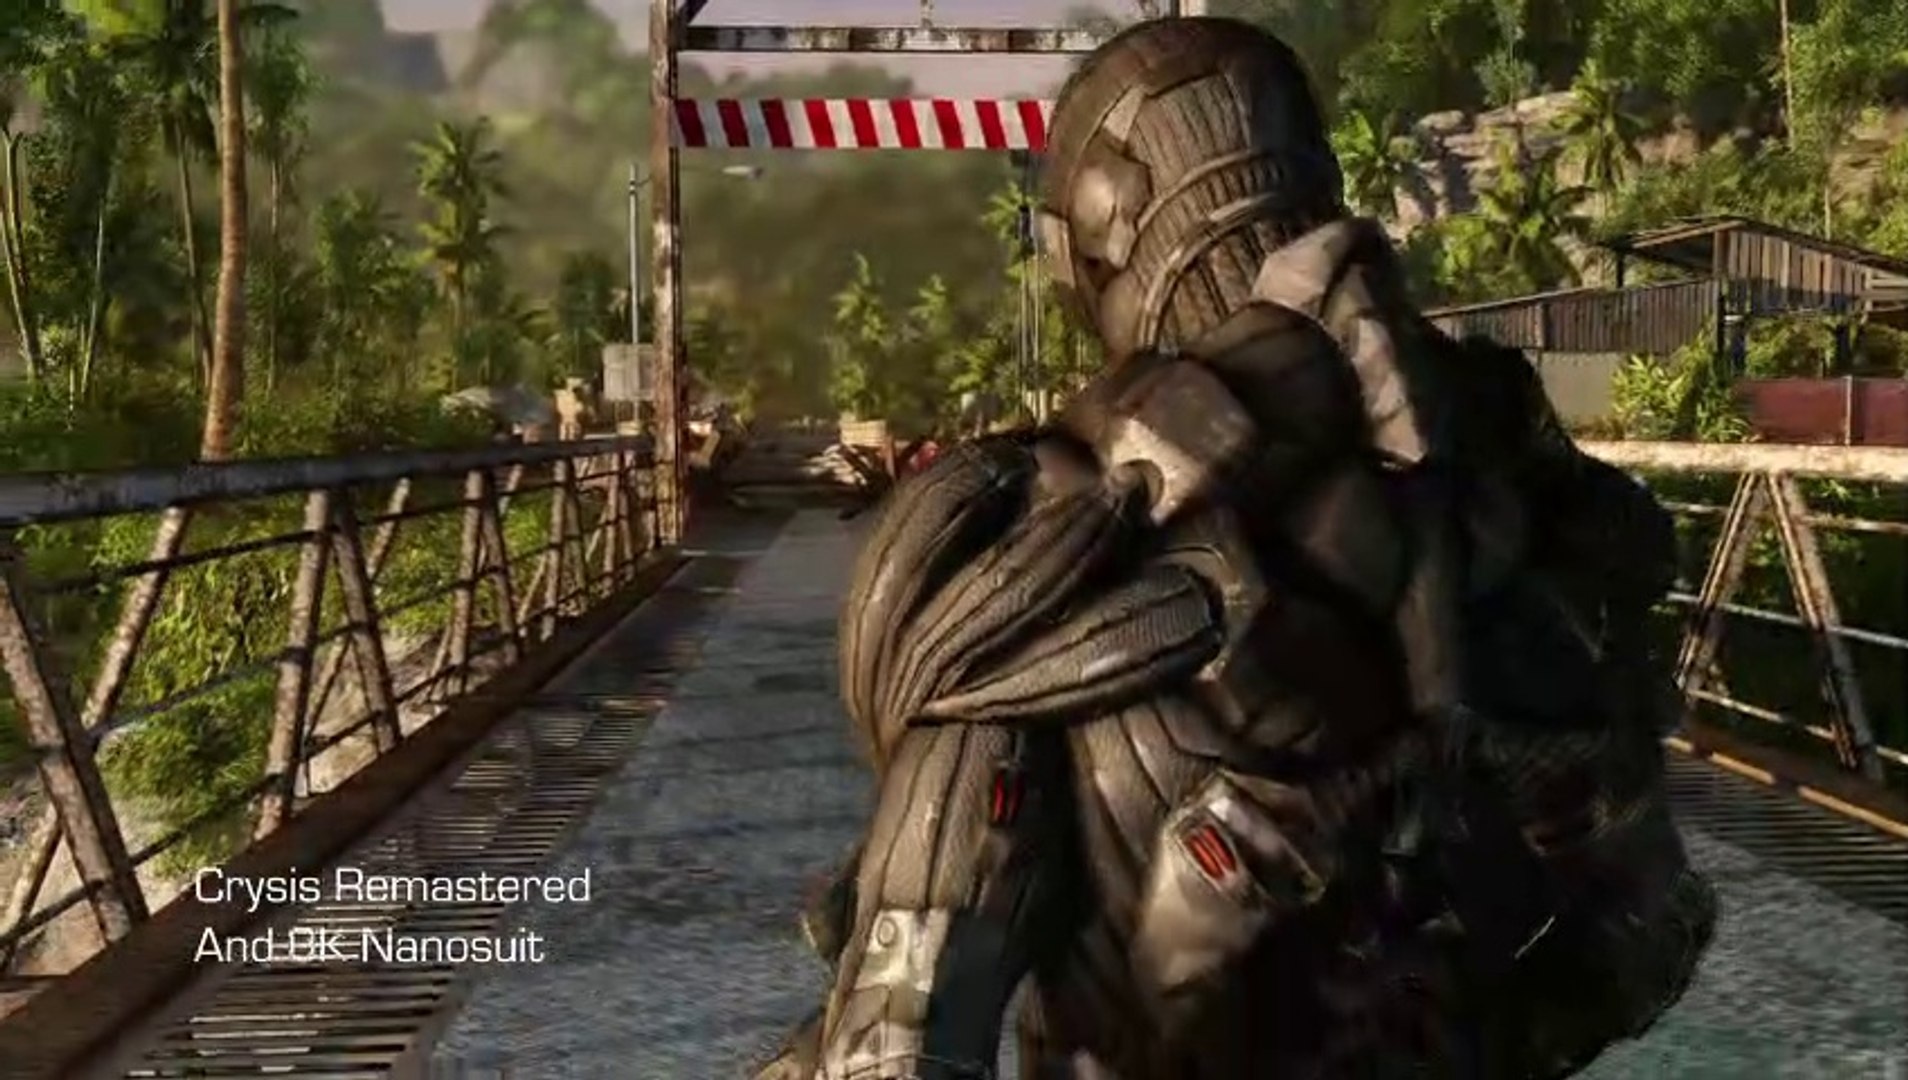 Crysis Remastered - Bande-annonce officielle 8K